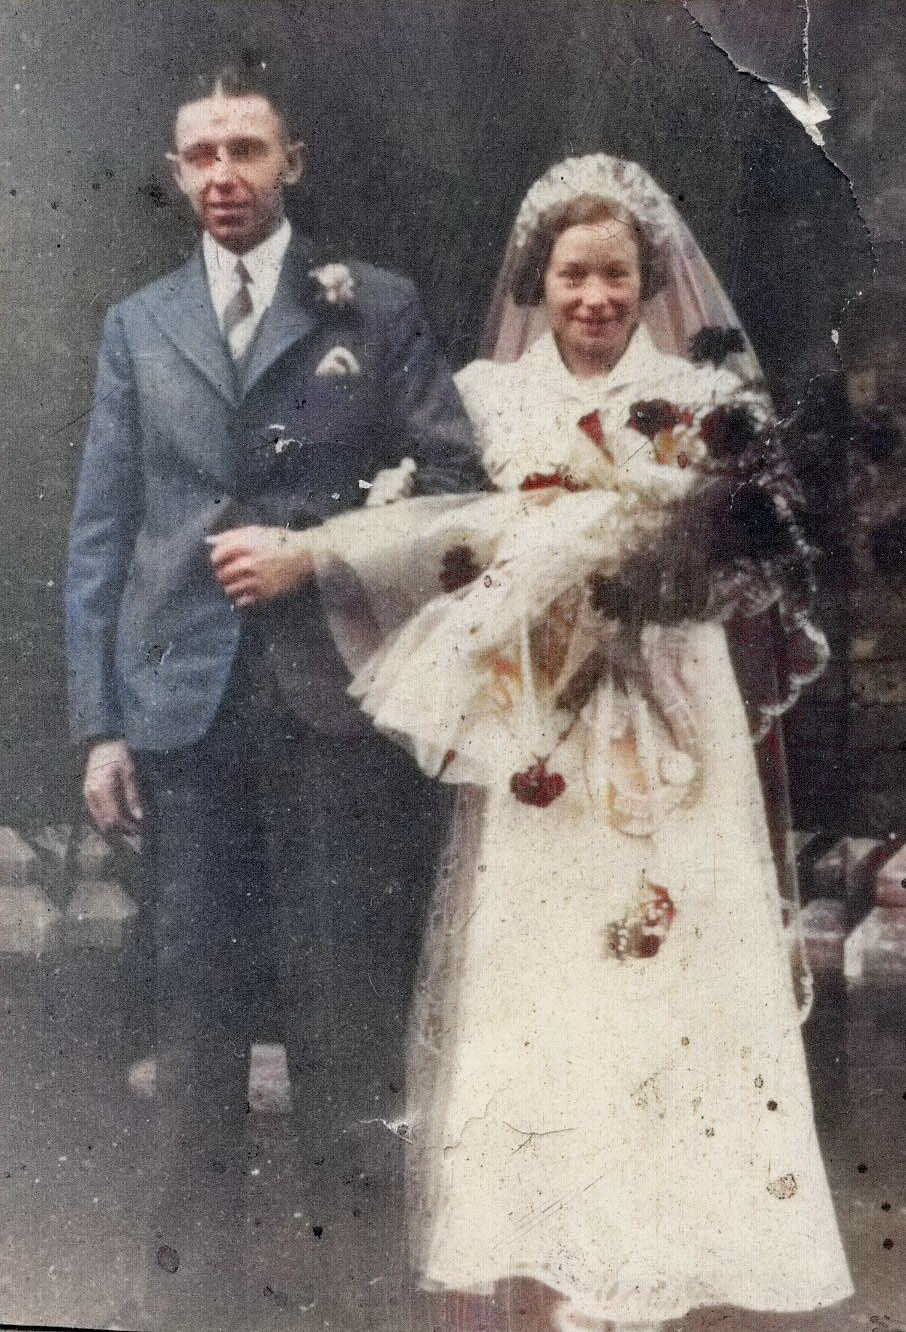 The Wedding of Frederick Fox & Marjorie Lawrence 1939